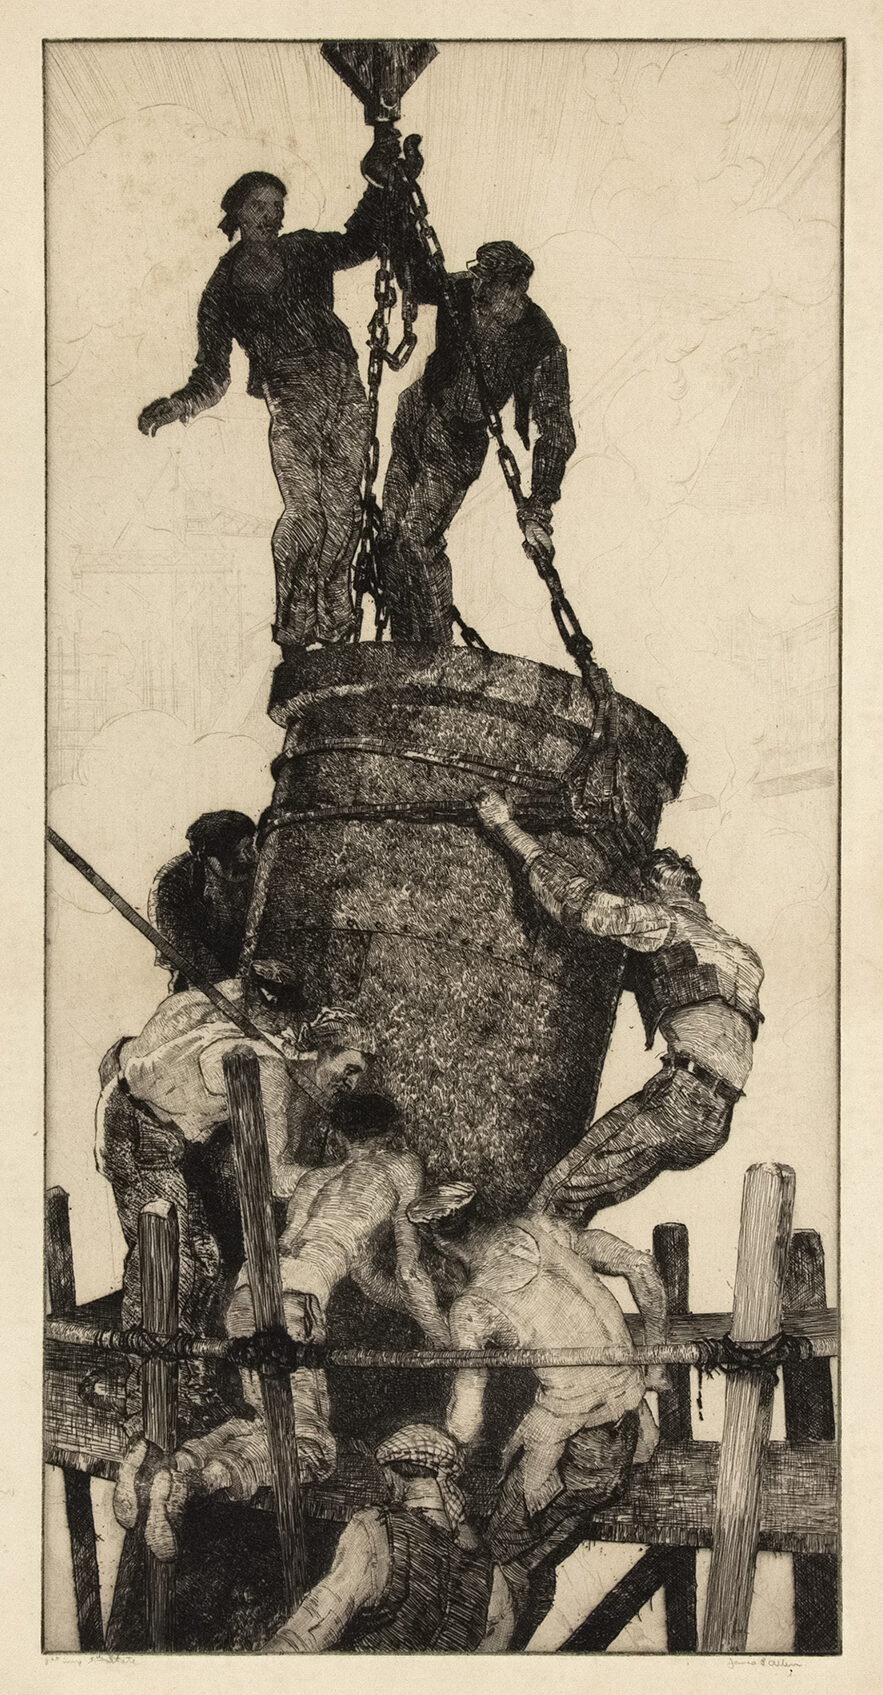 James Allen Brazilian Builders, 1933 Etching 8 x 16 7/8 inches (20.3 x 42.9 cm) Edition of 50